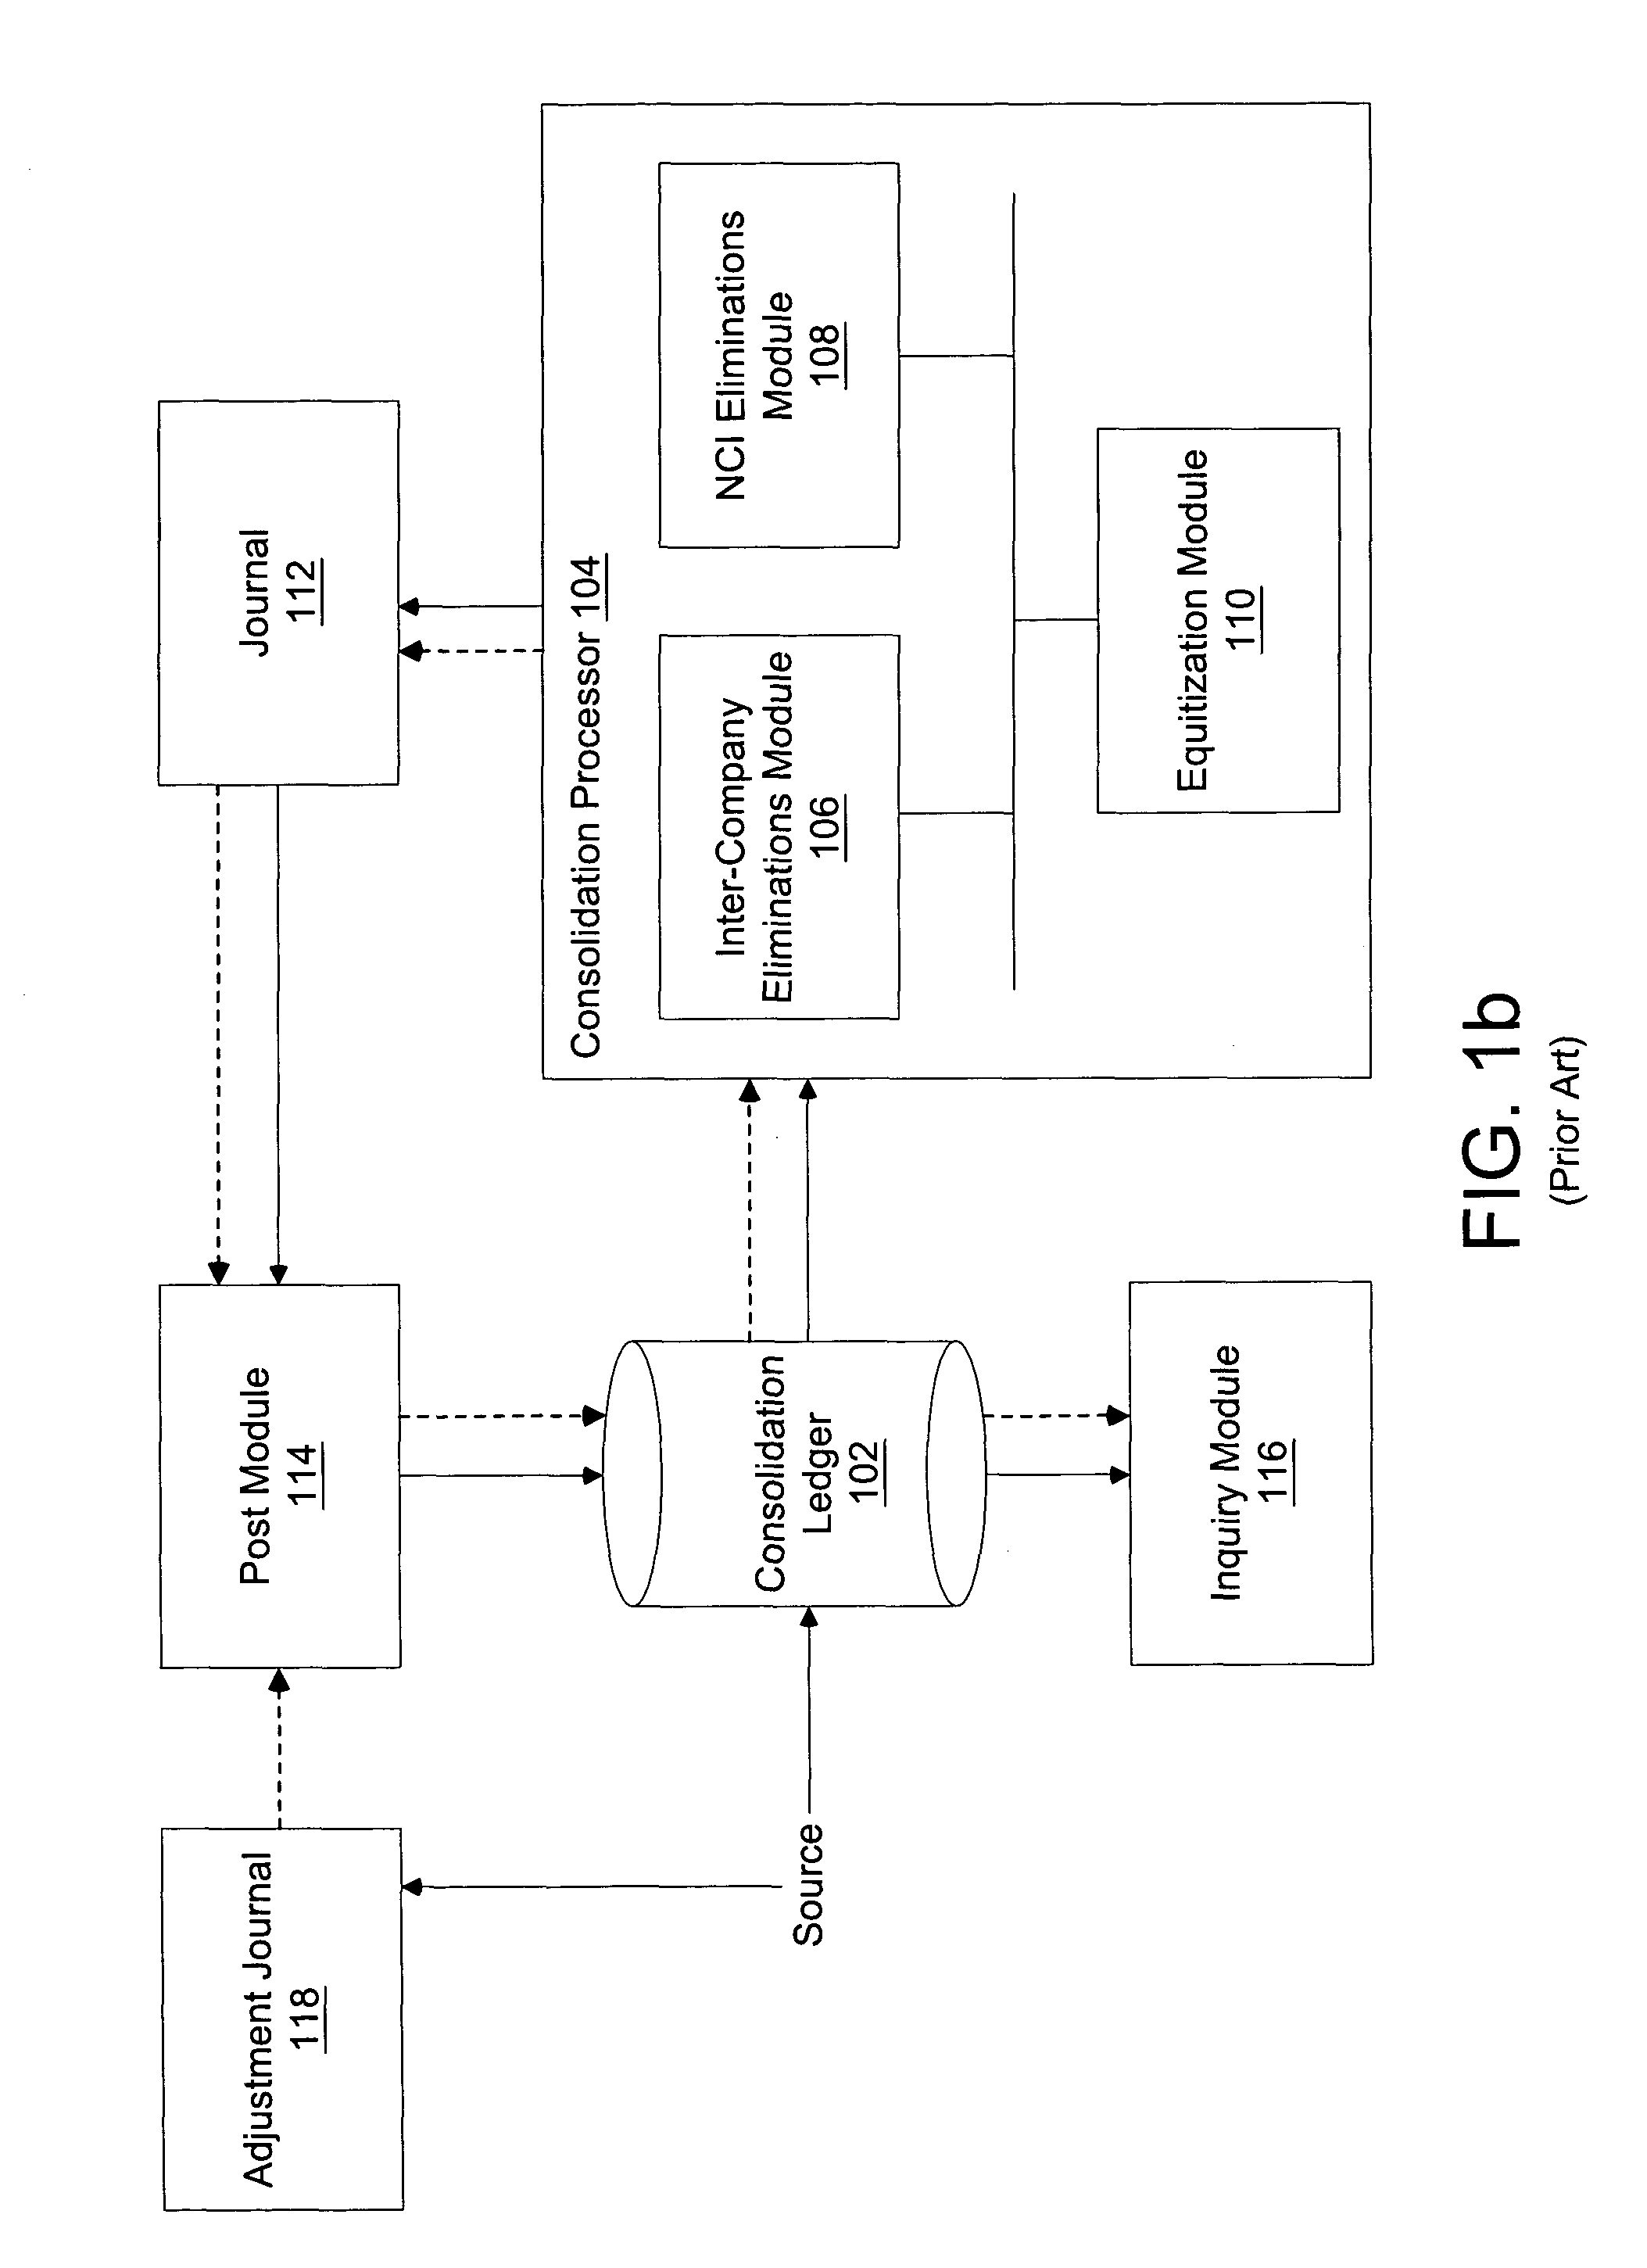 System and method for utilizing proforma processing of adjustments in consolidation processes